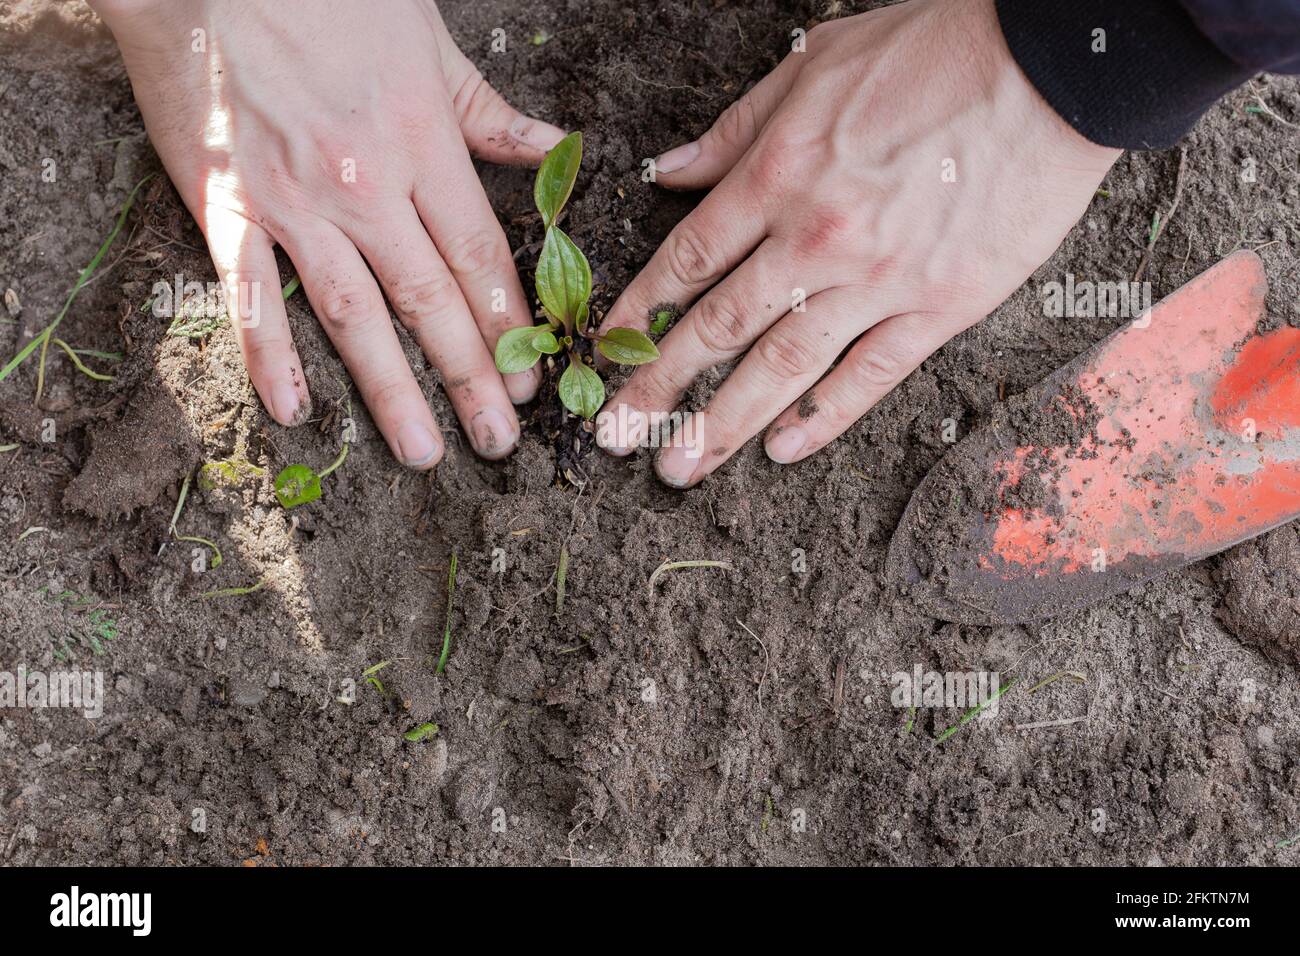 Two man hands planting a young tree or plant while working in the garden, seeding and planting and growing top view, farmers hands care of new life, Stock Photo